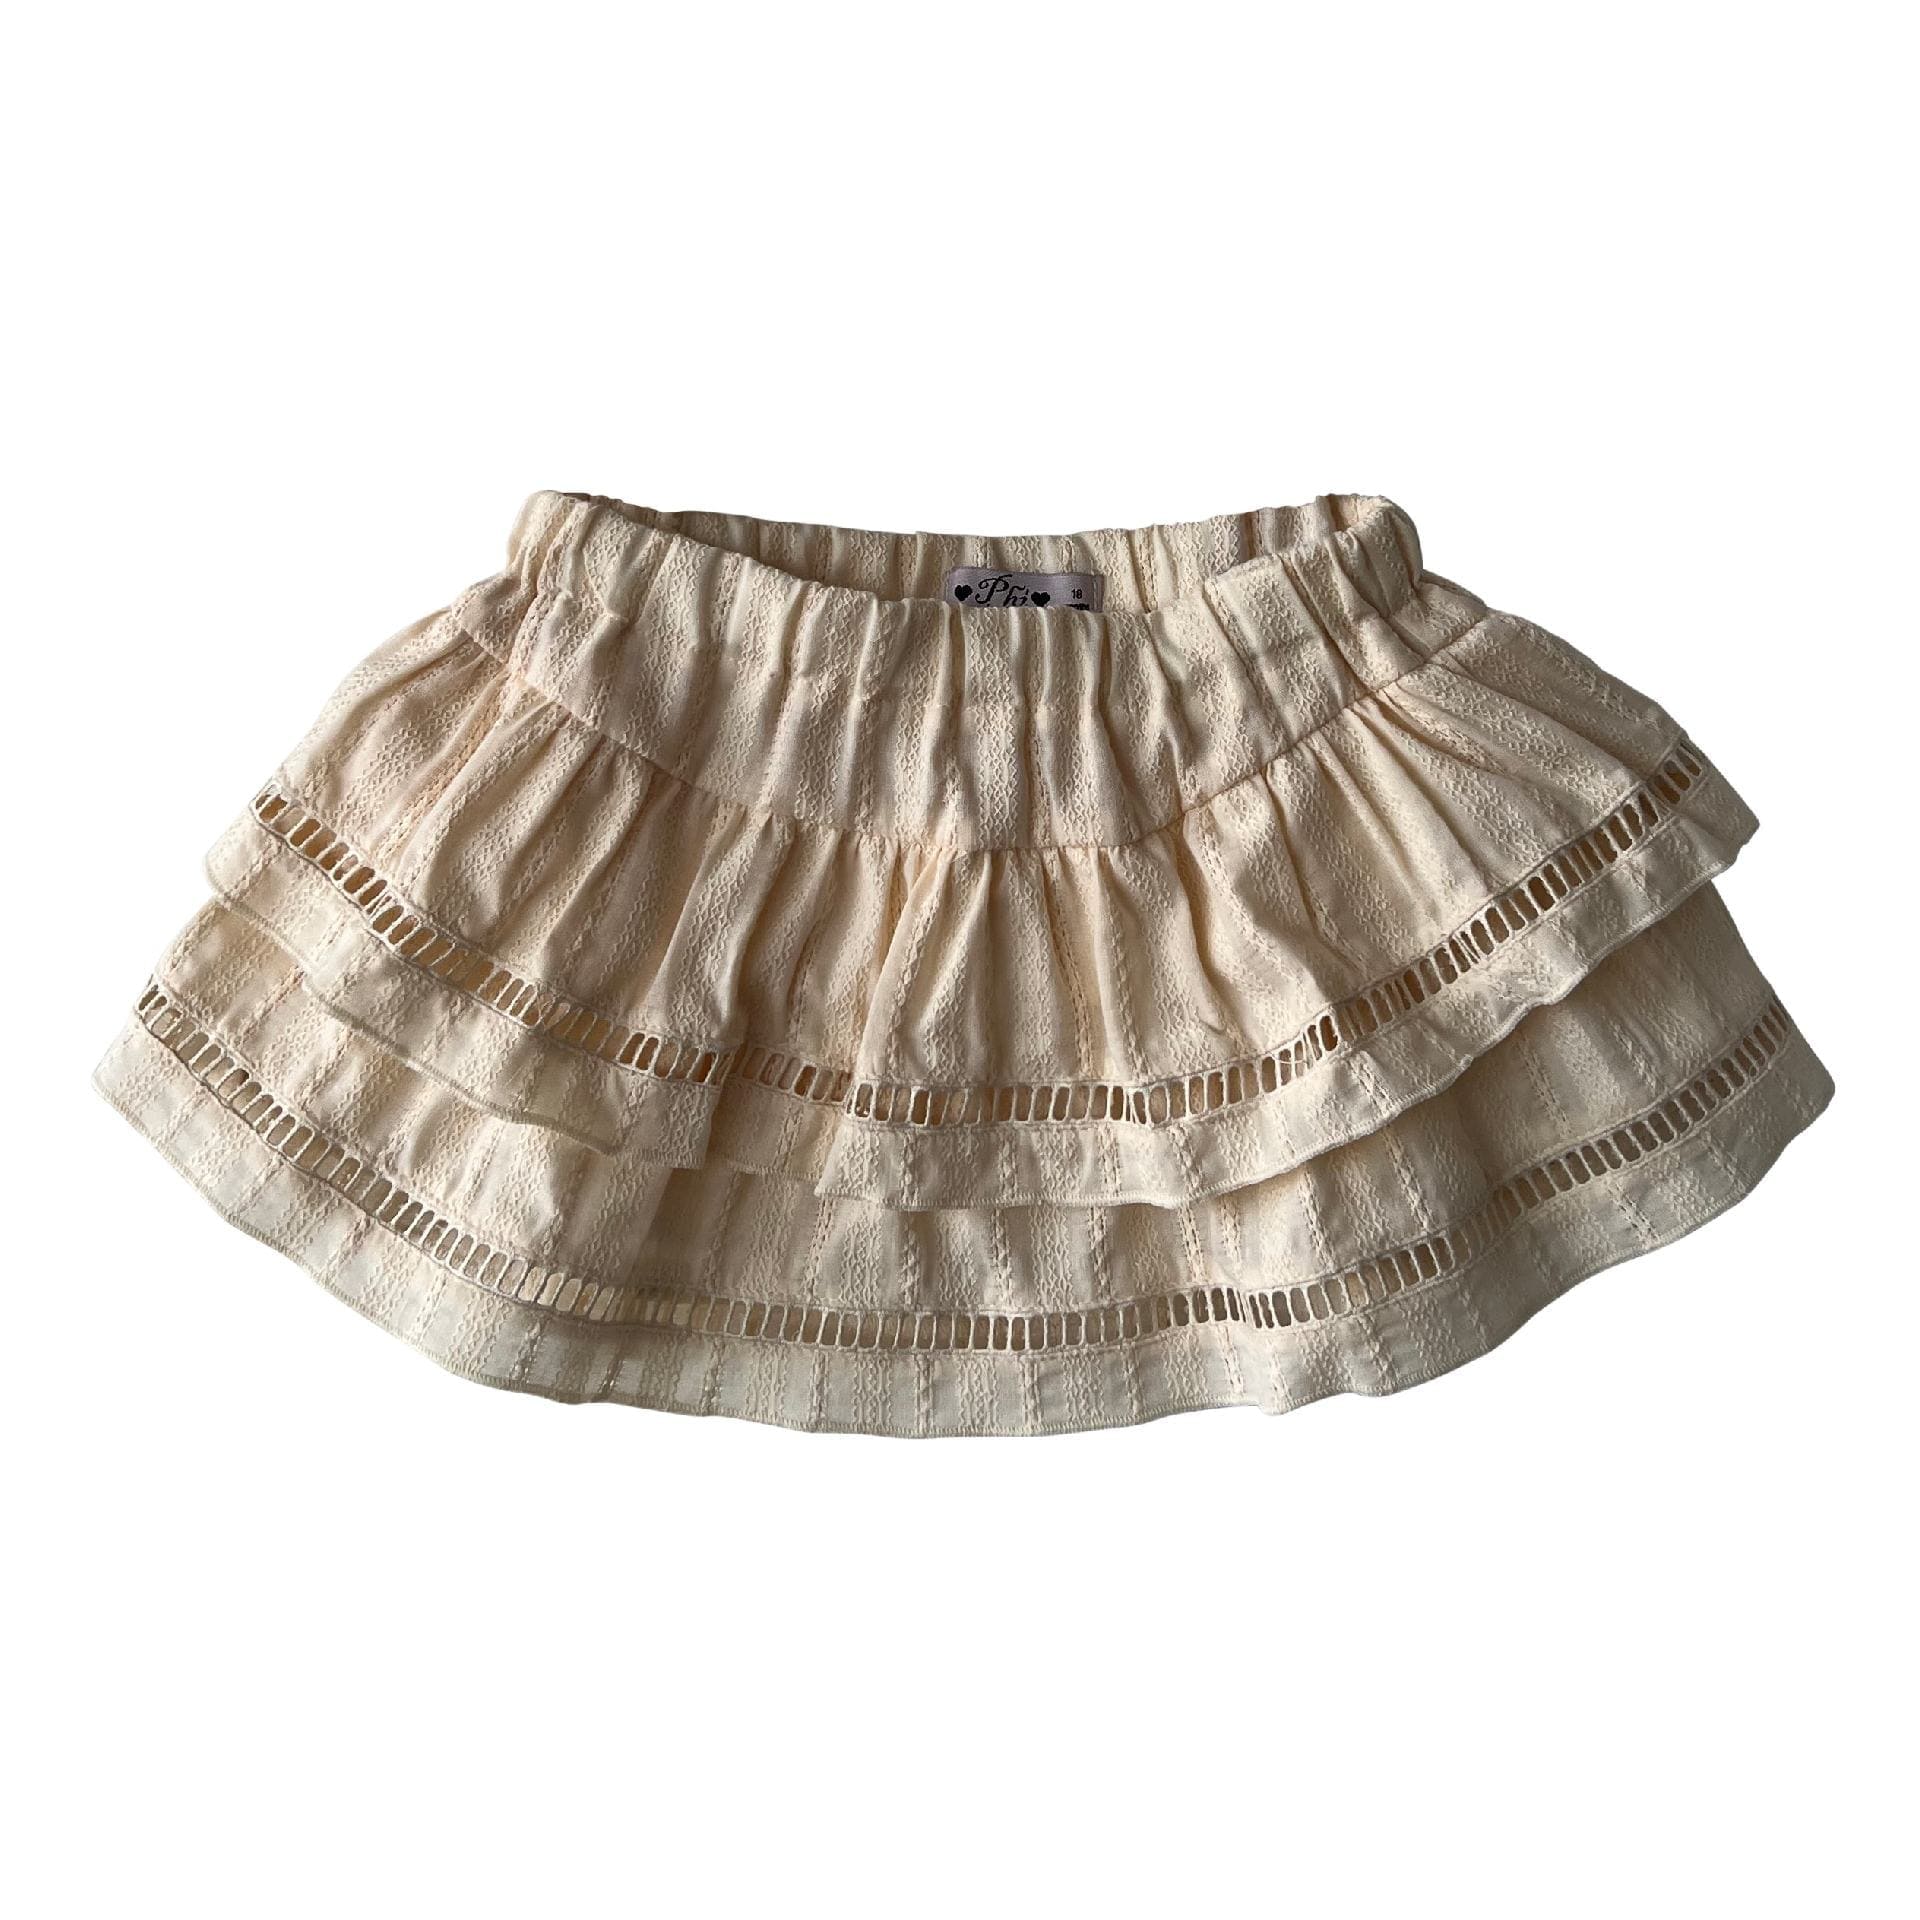 Beige embroidery skirt